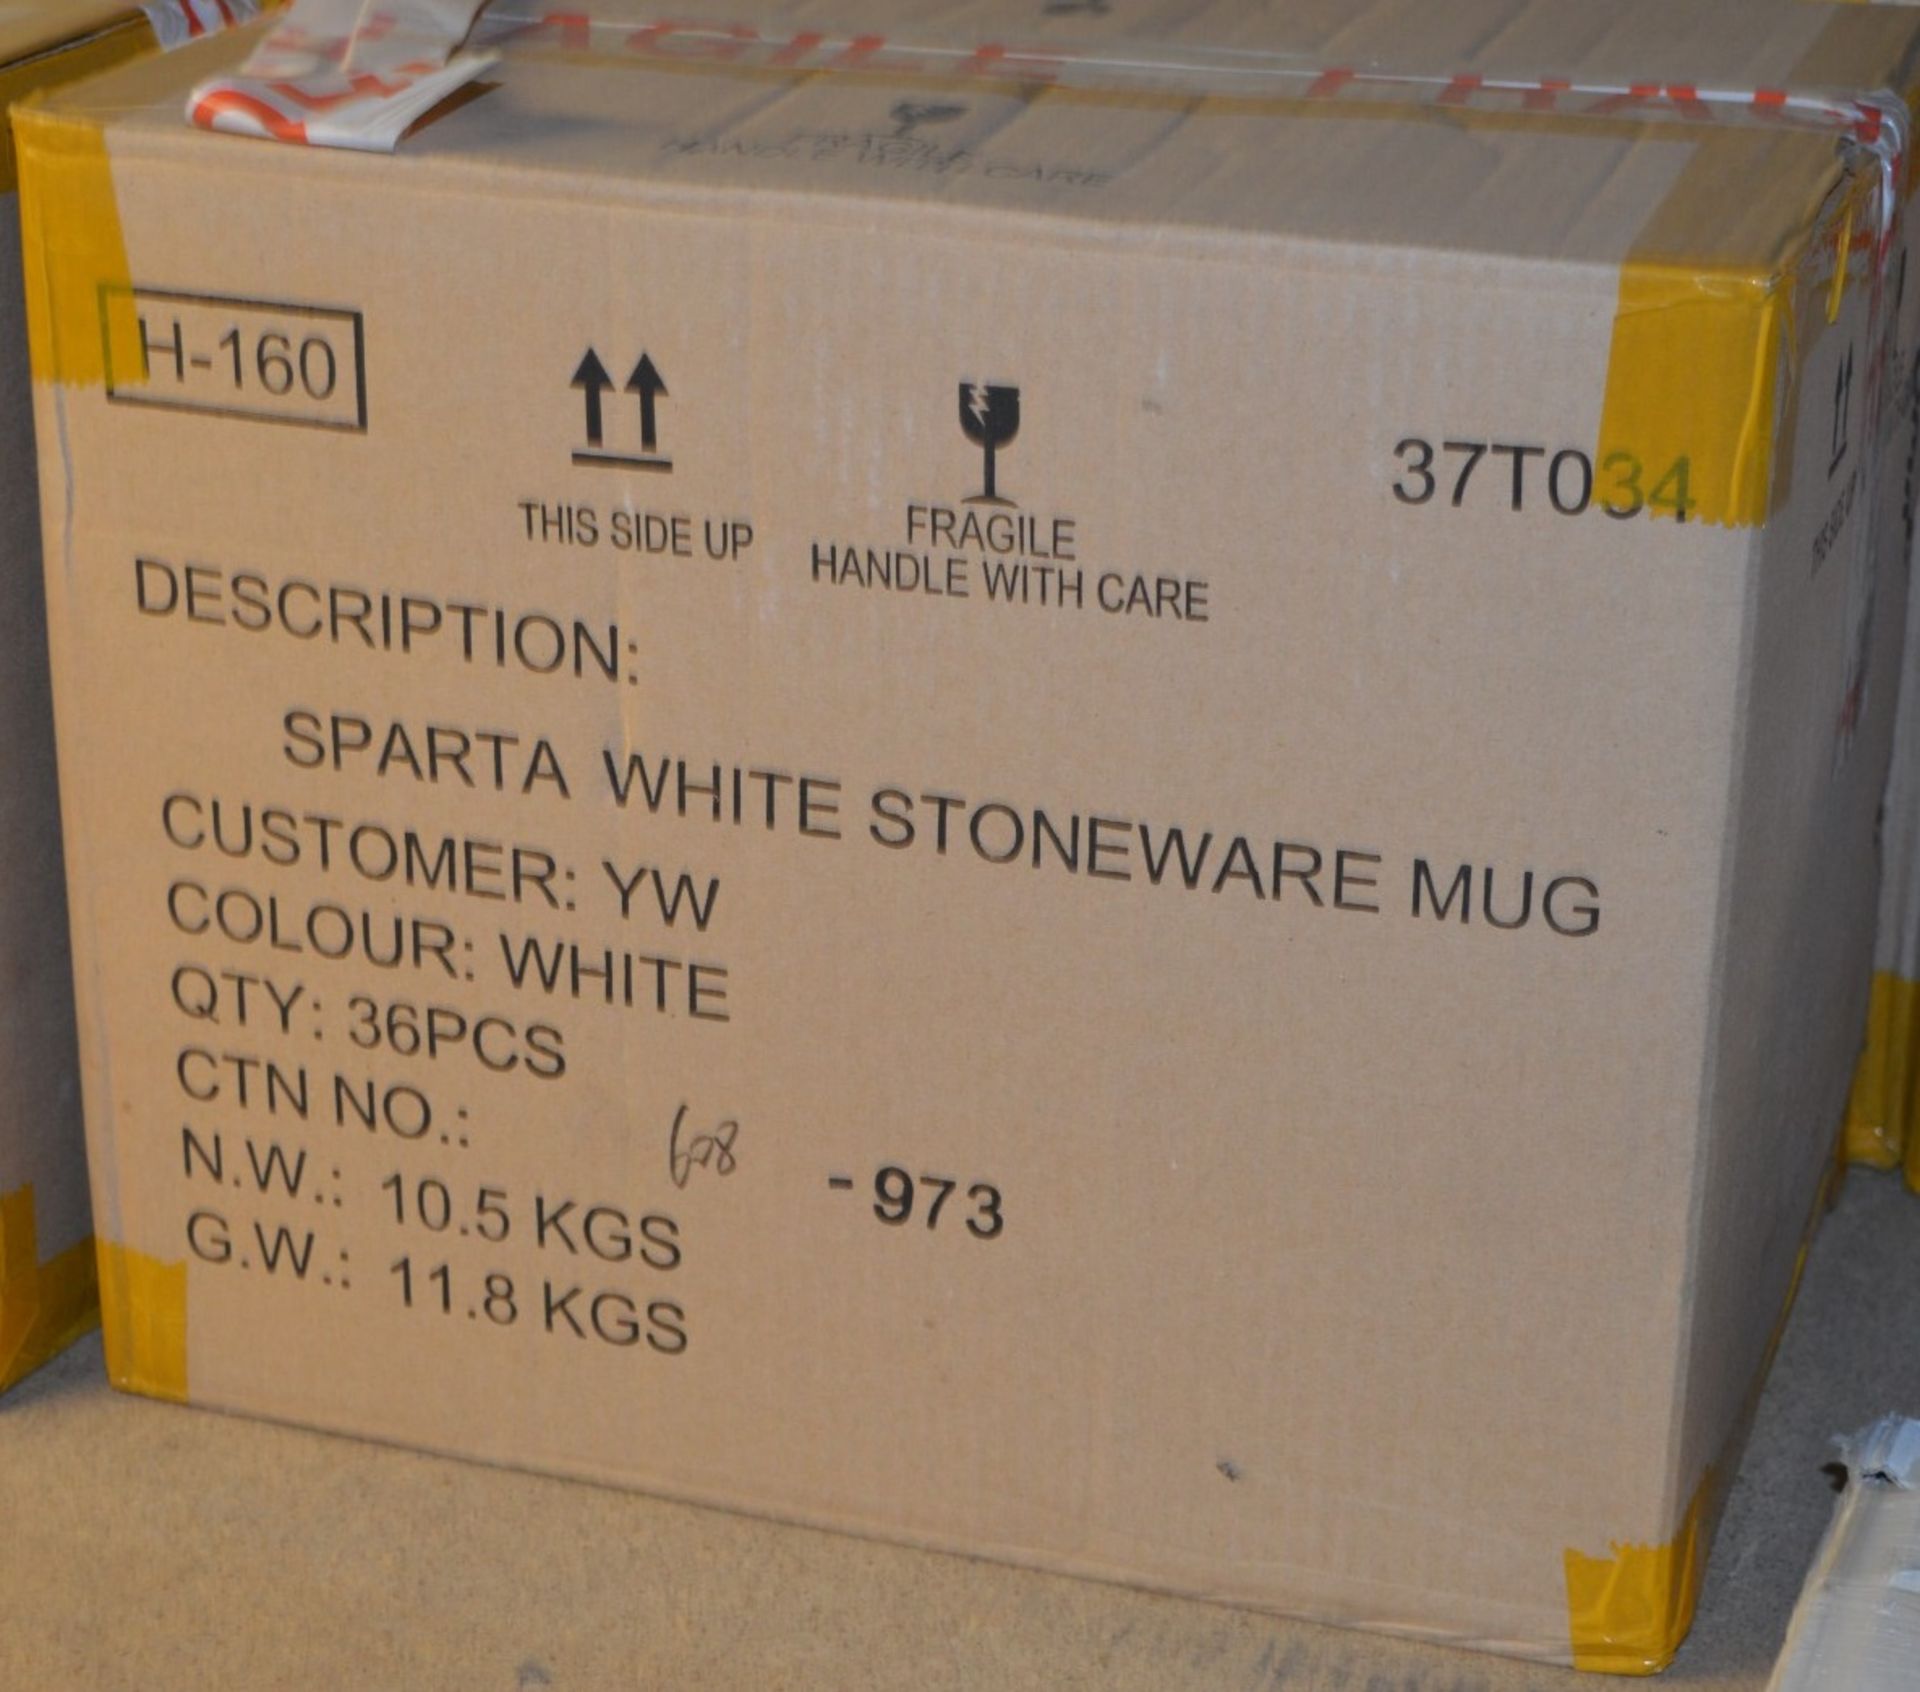 36 x Sparta White Stoneware Coffee Mugs - Branded - New Stock - Full Box of 36 - CL300 - Ref - Image 2 of 3